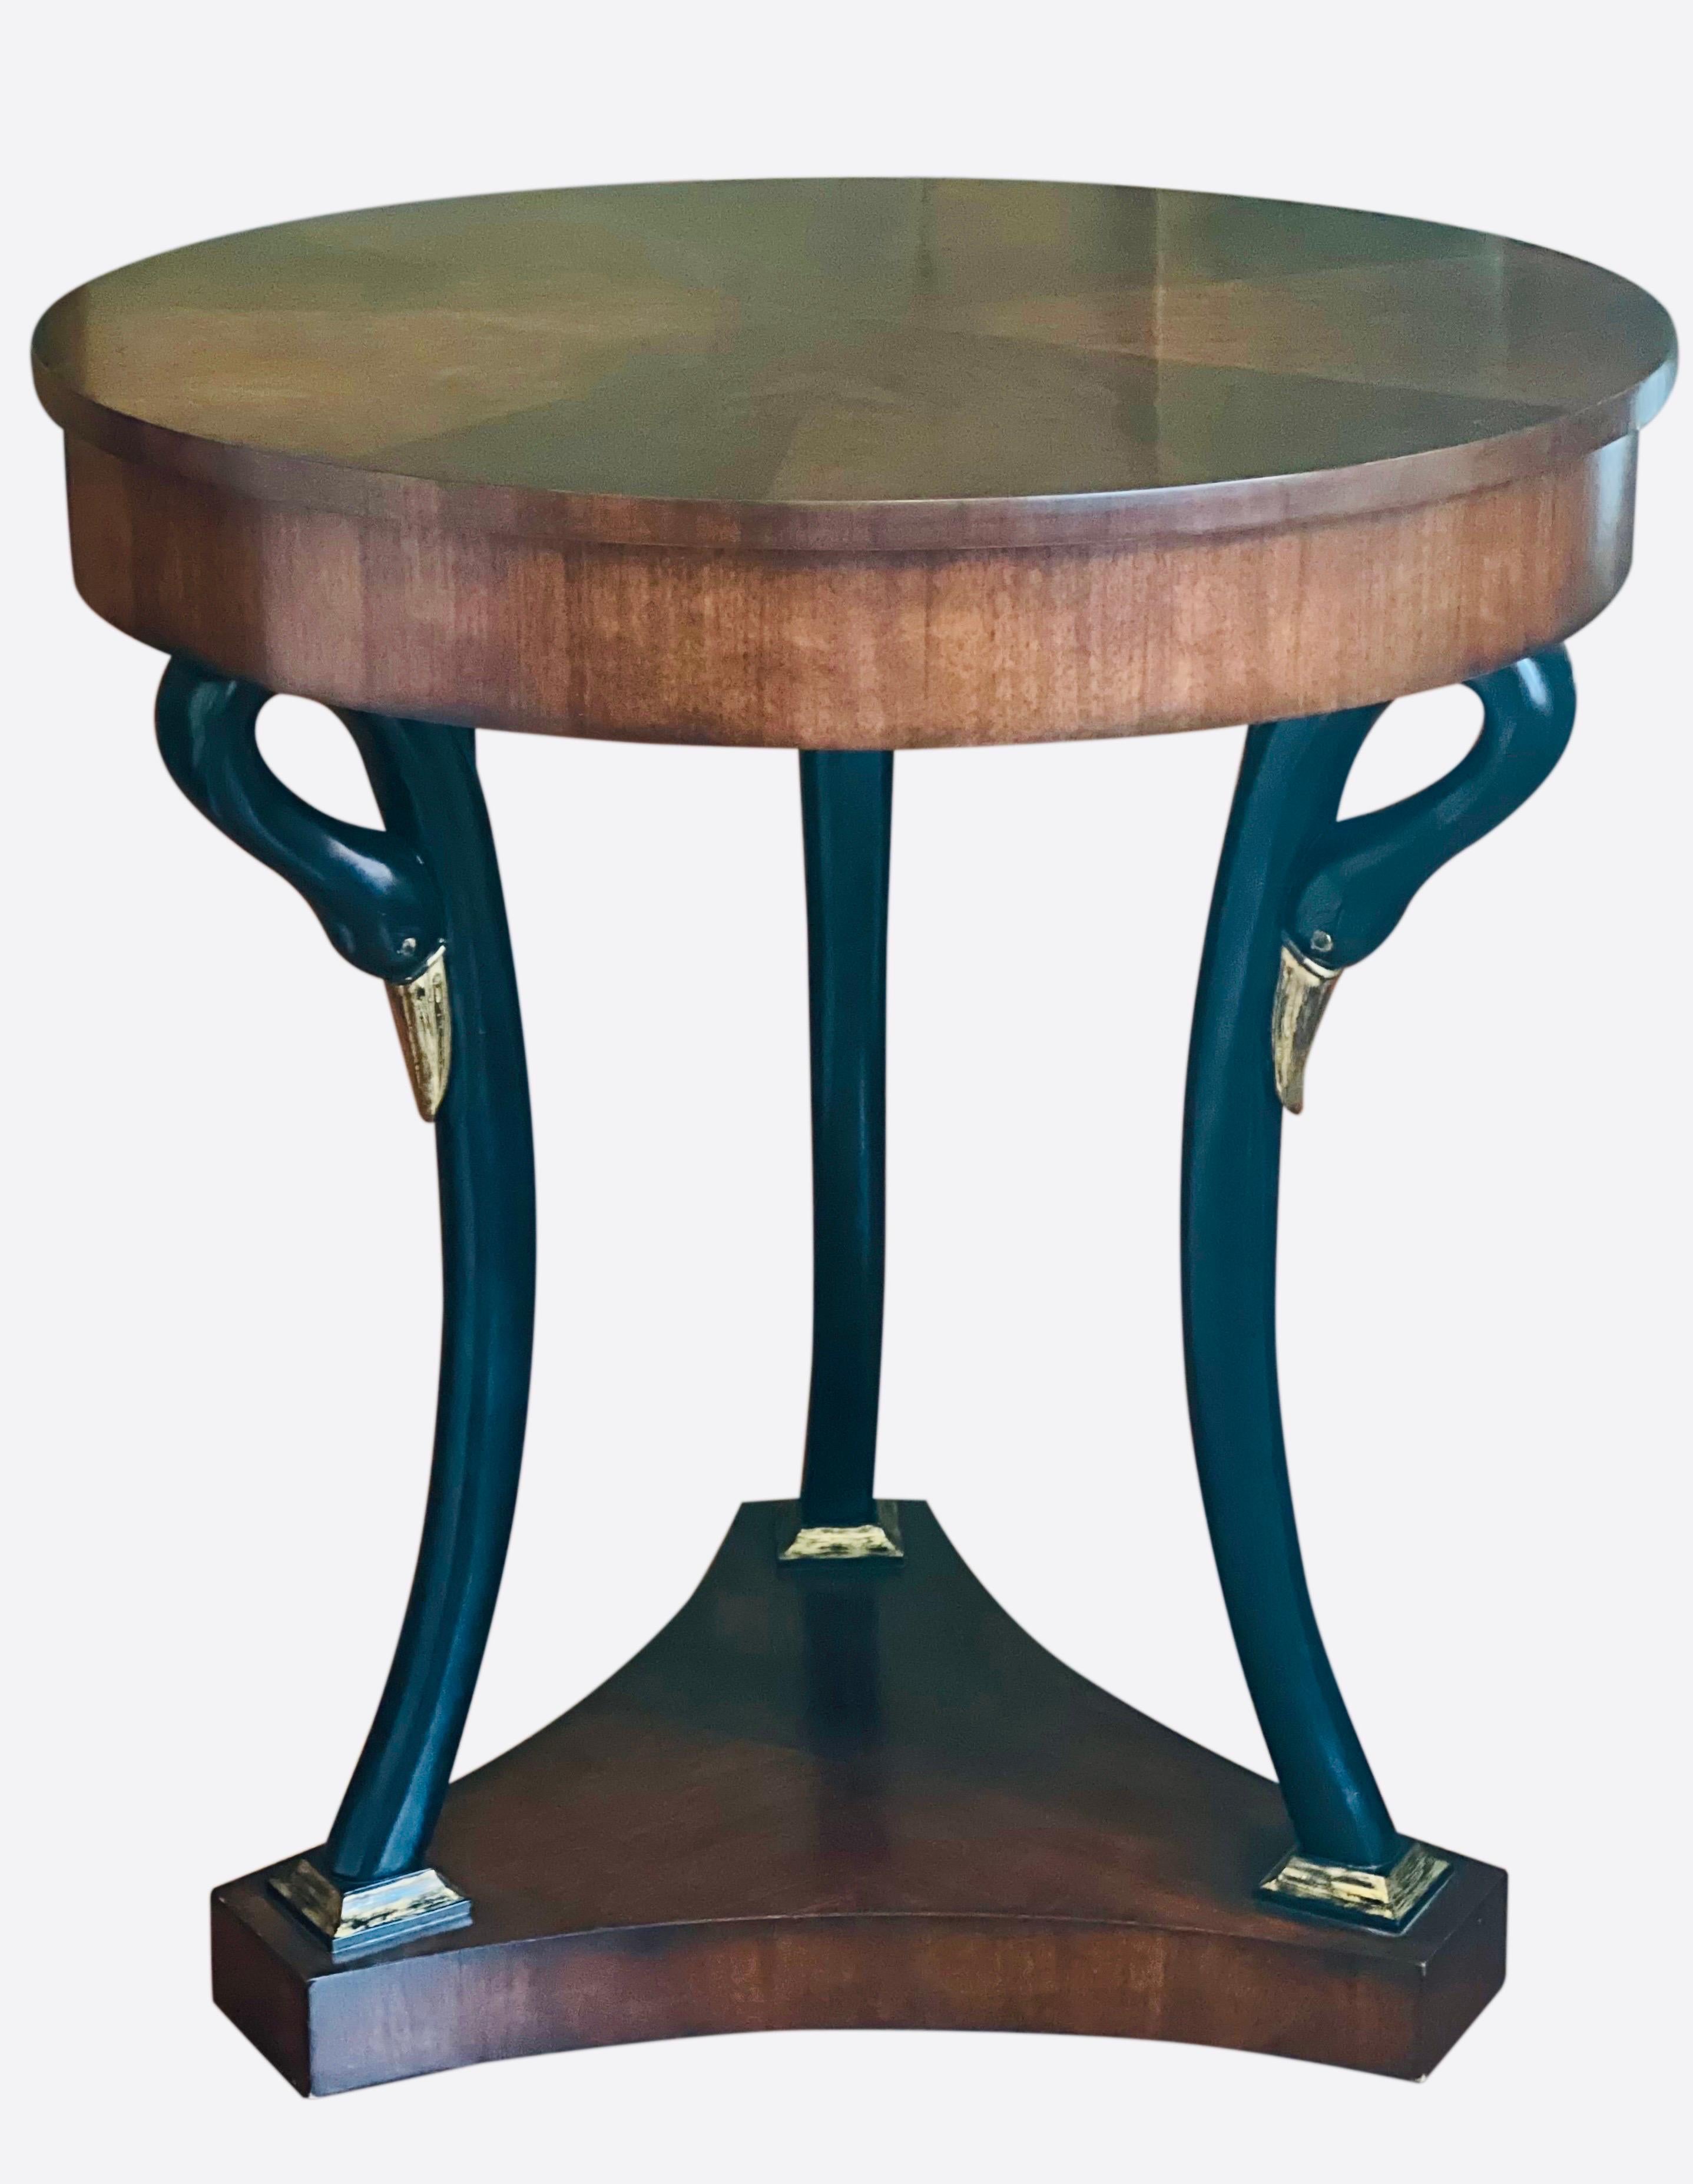 French Empire Biedermeier Mahogany Center Table by Century Furniture In Good Condition For Sale In Doylestown, PA